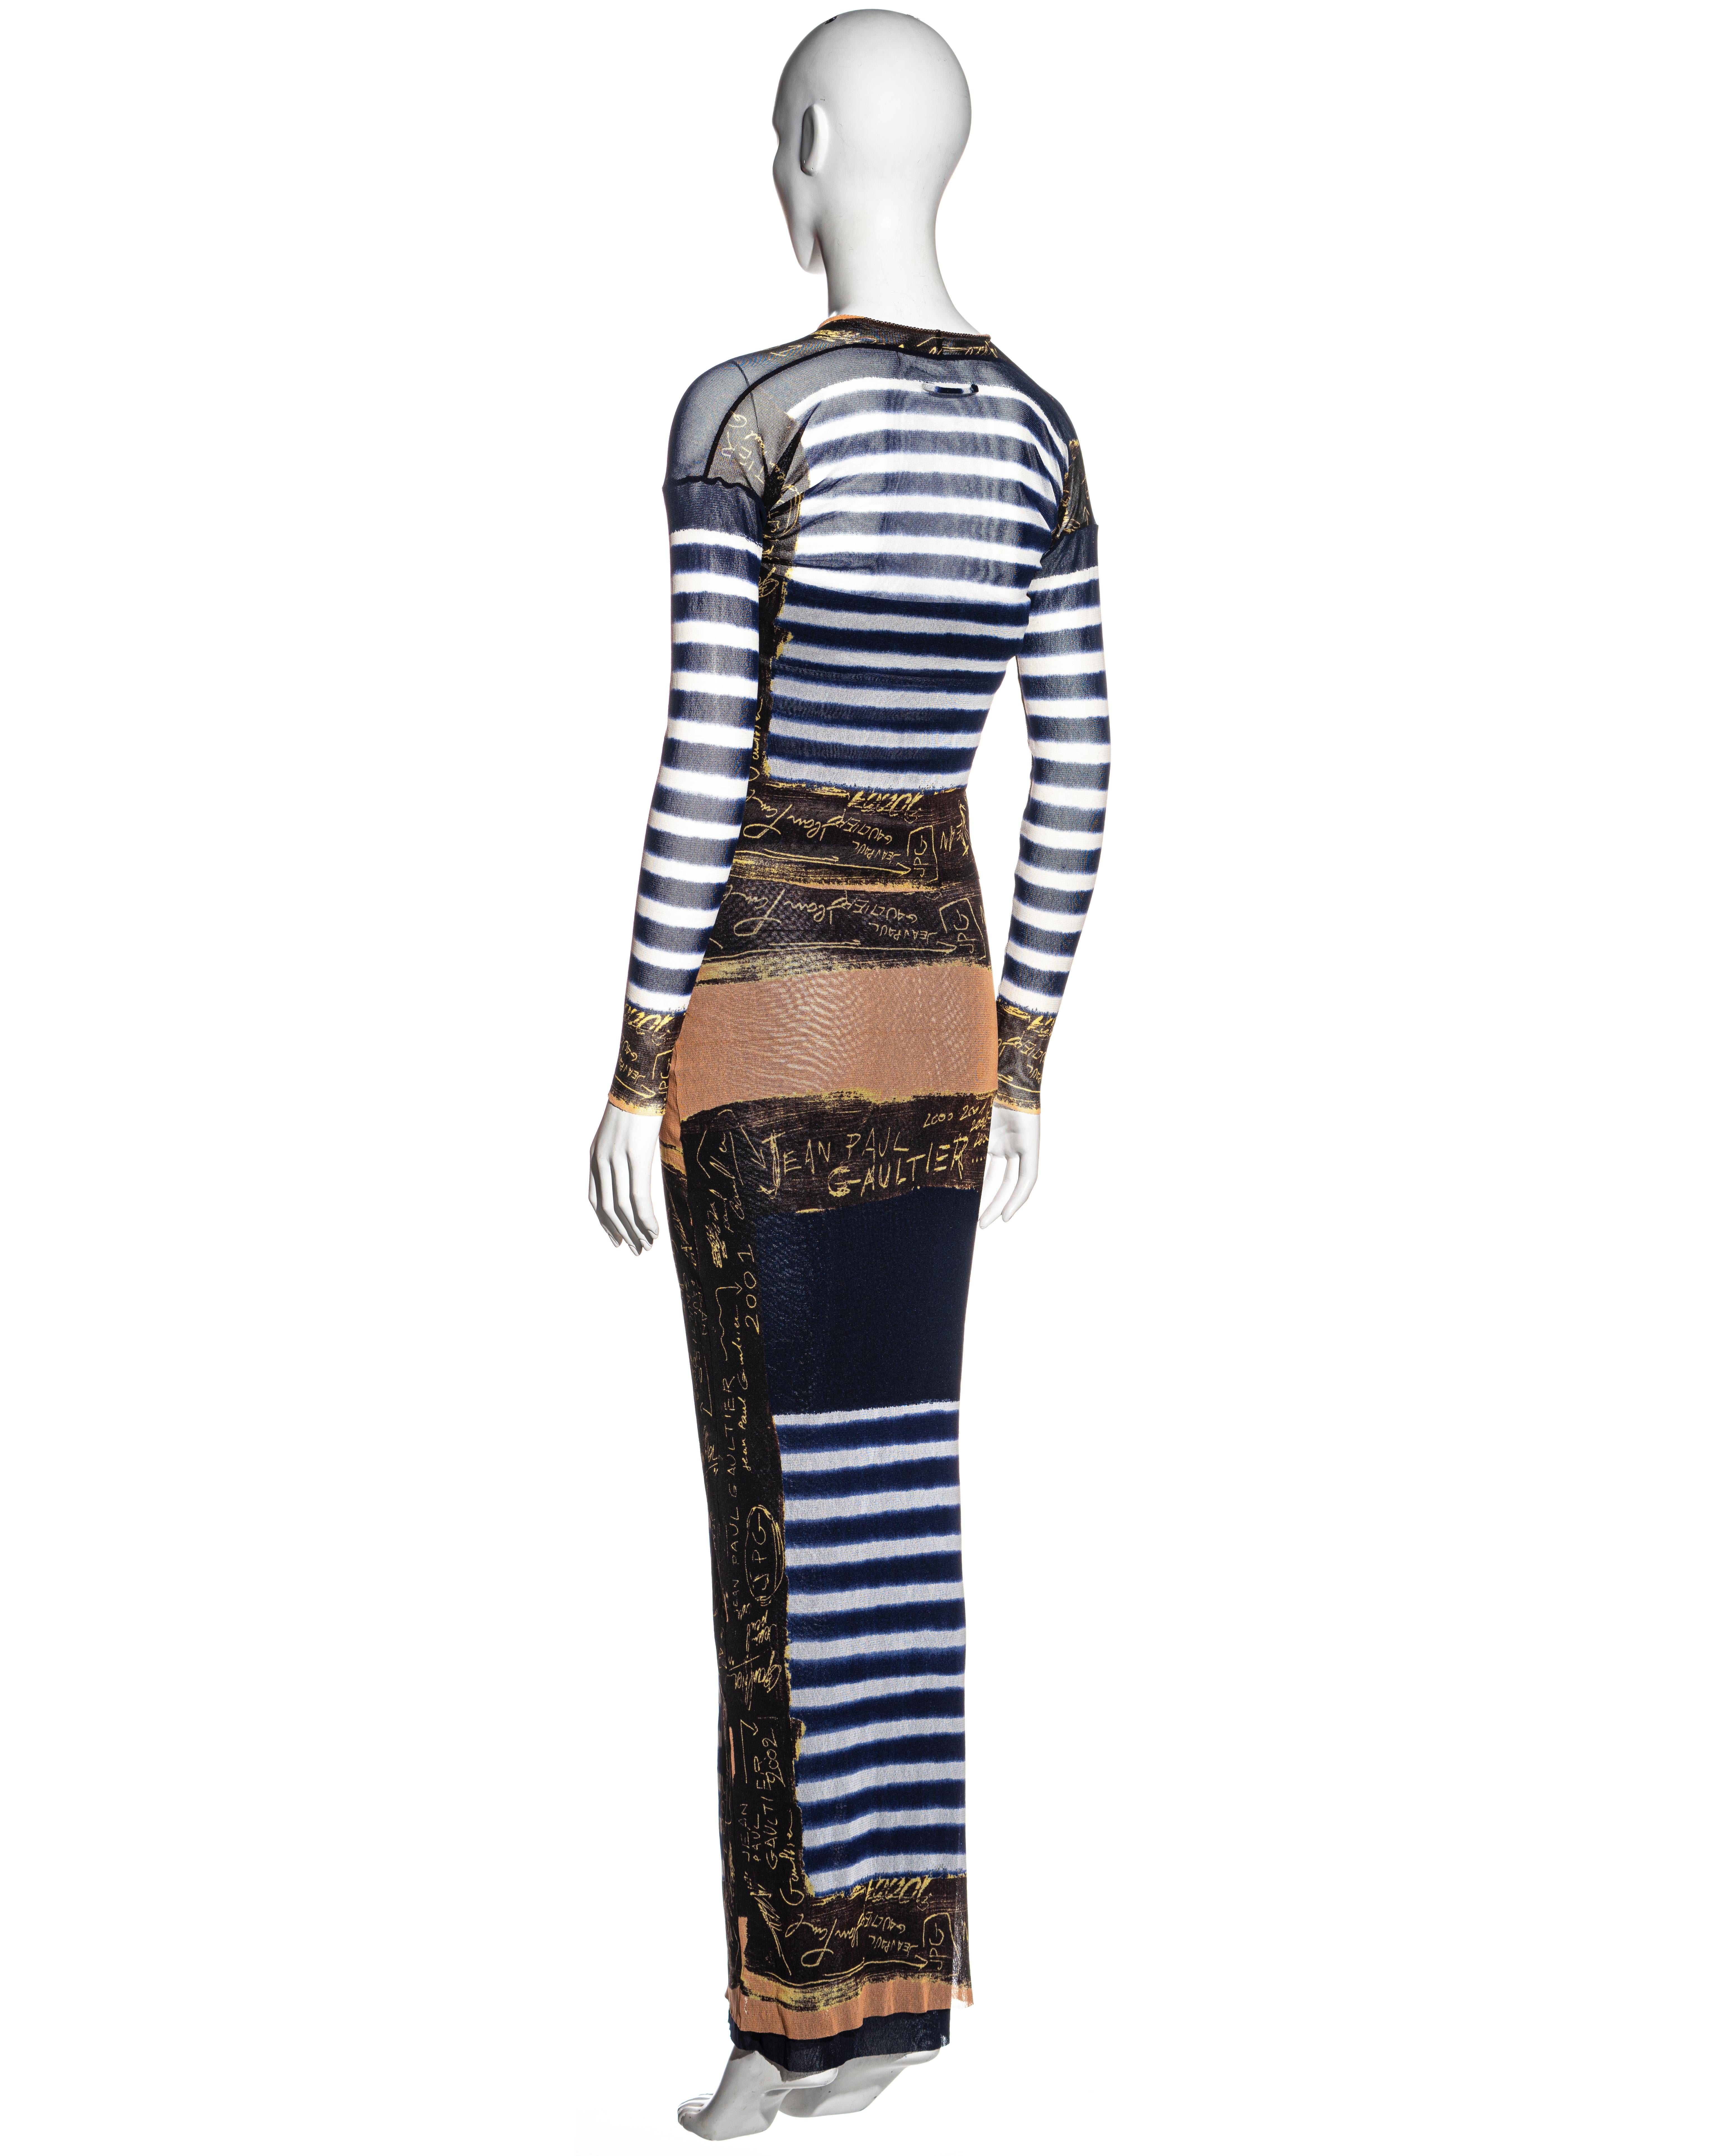 Jean Paul Gaultier navy striped nylon mesh tube dress and cardigan set, c. 2001 In Good Condition For Sale In London, GB